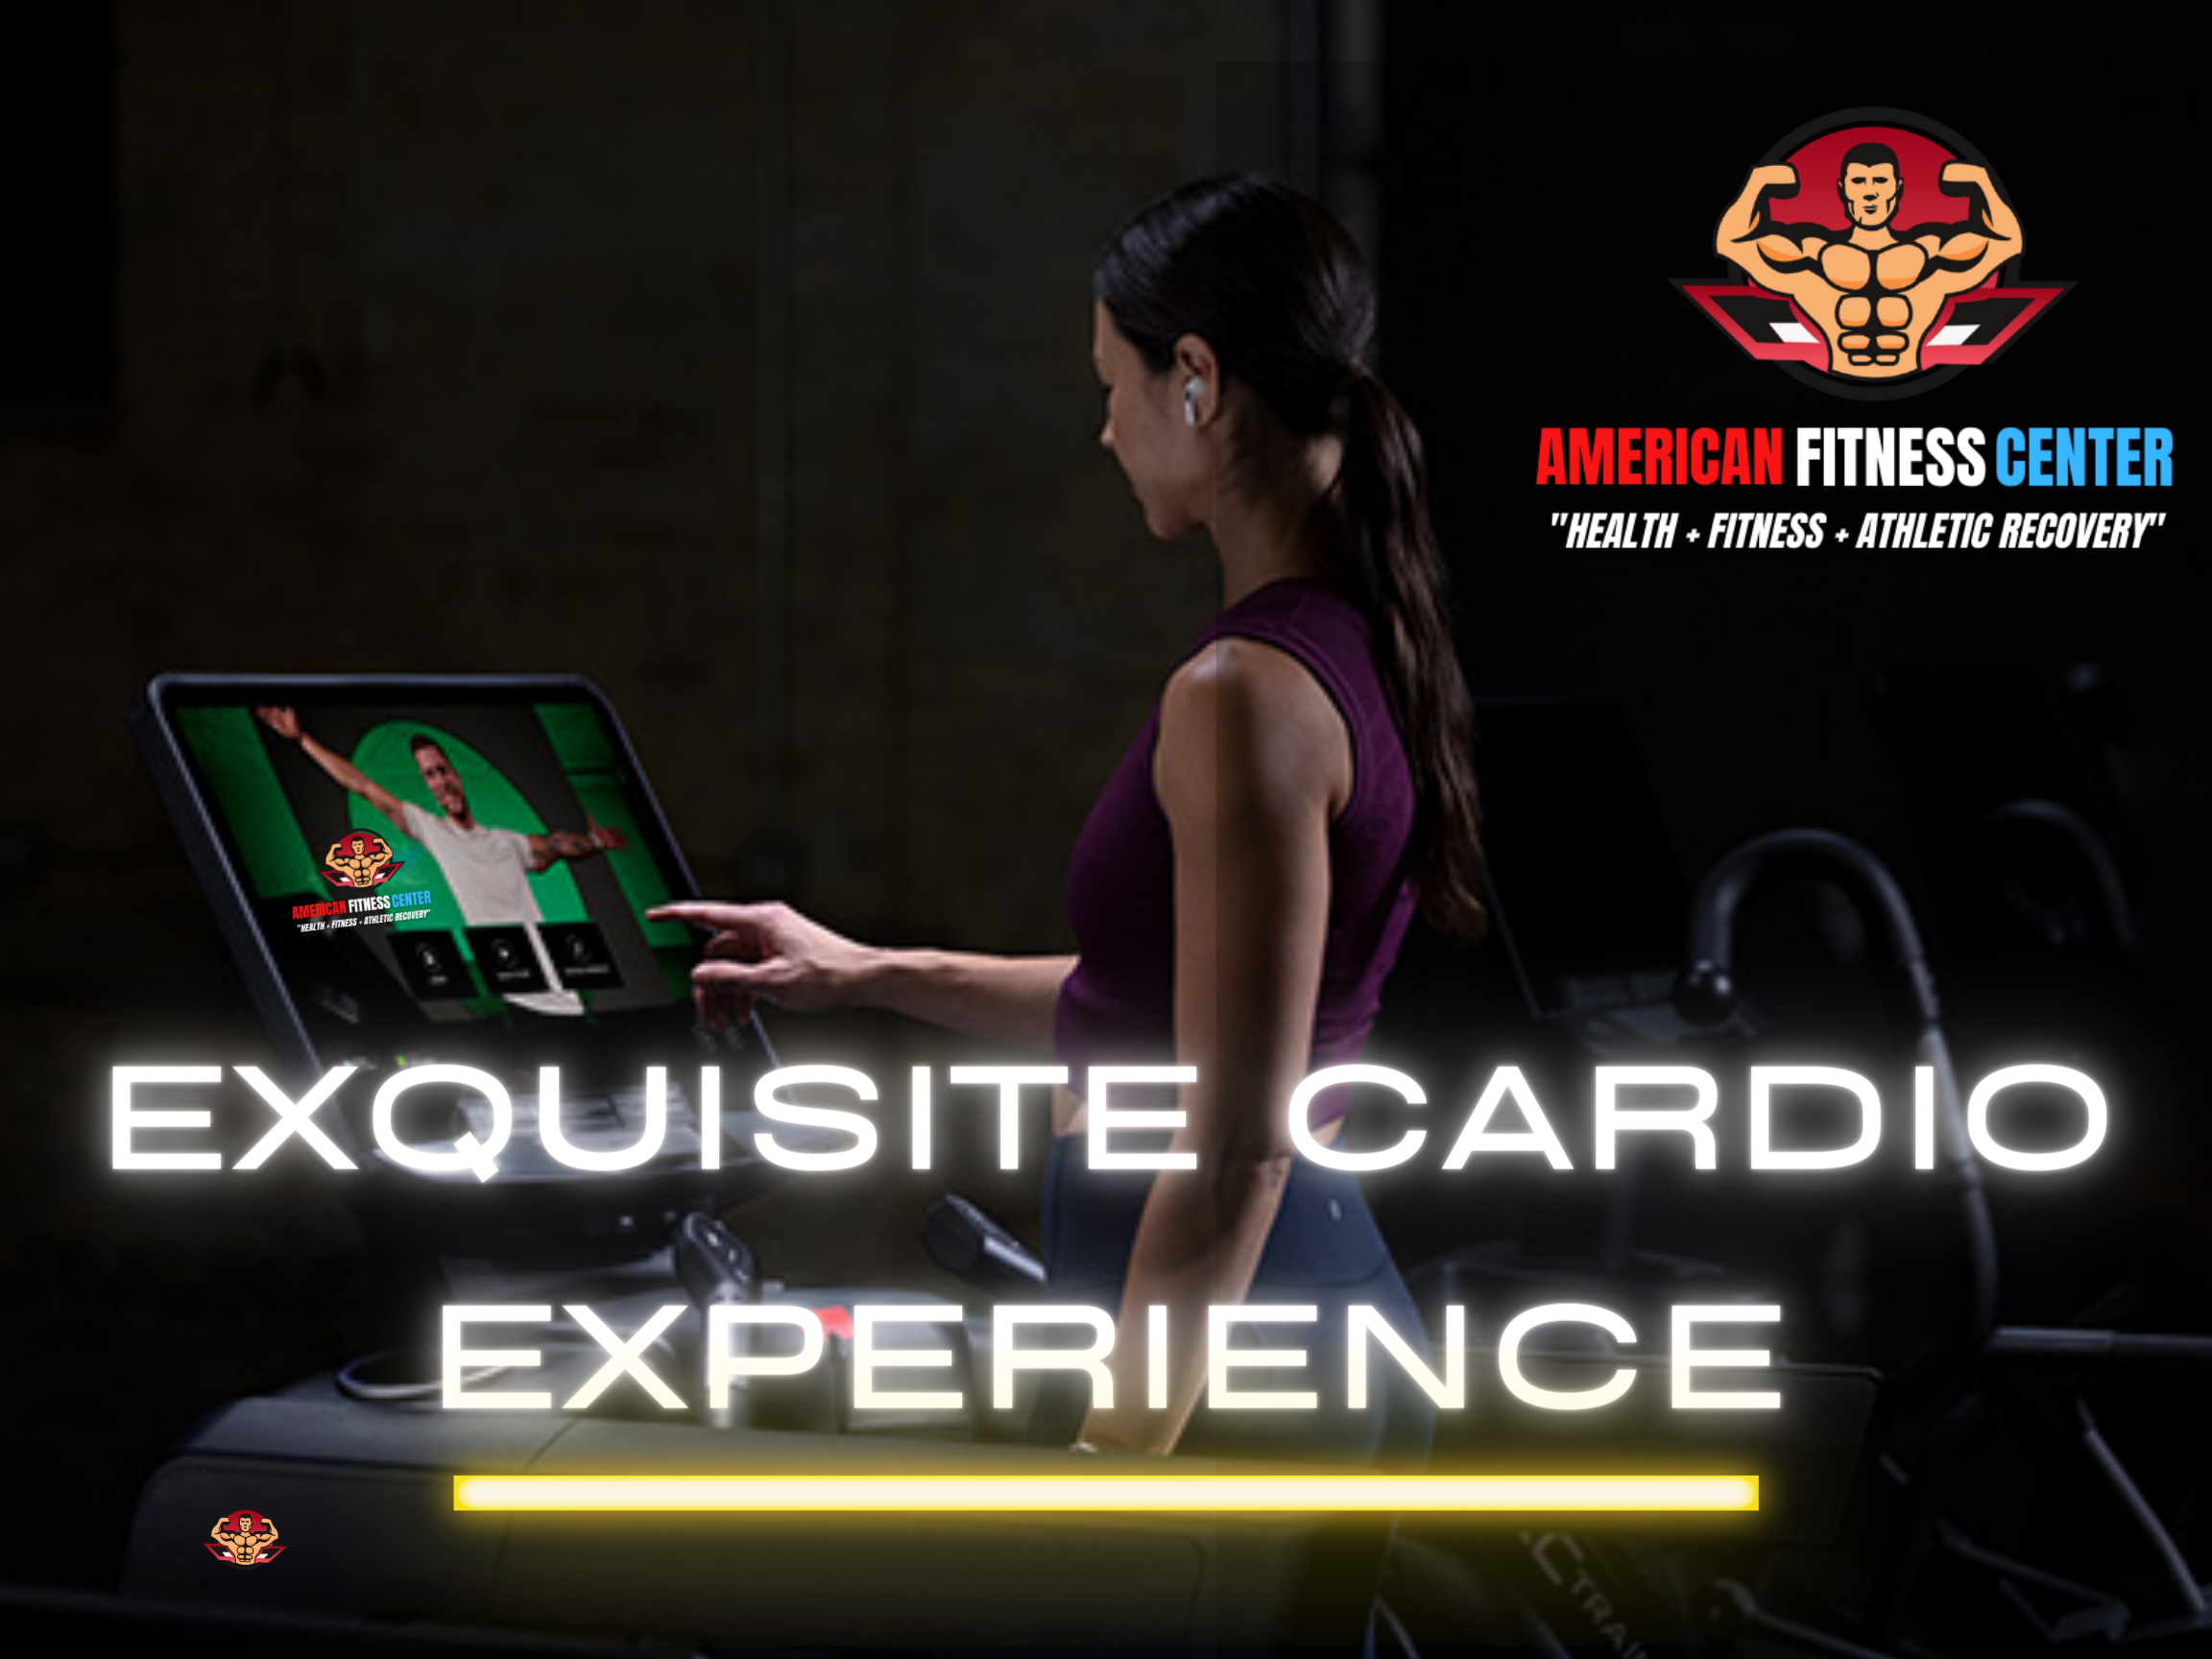 High-End-Cardio-Equipment-Near-Me-in-Roswell-GA-American-Fitness-Center-West-Roswell